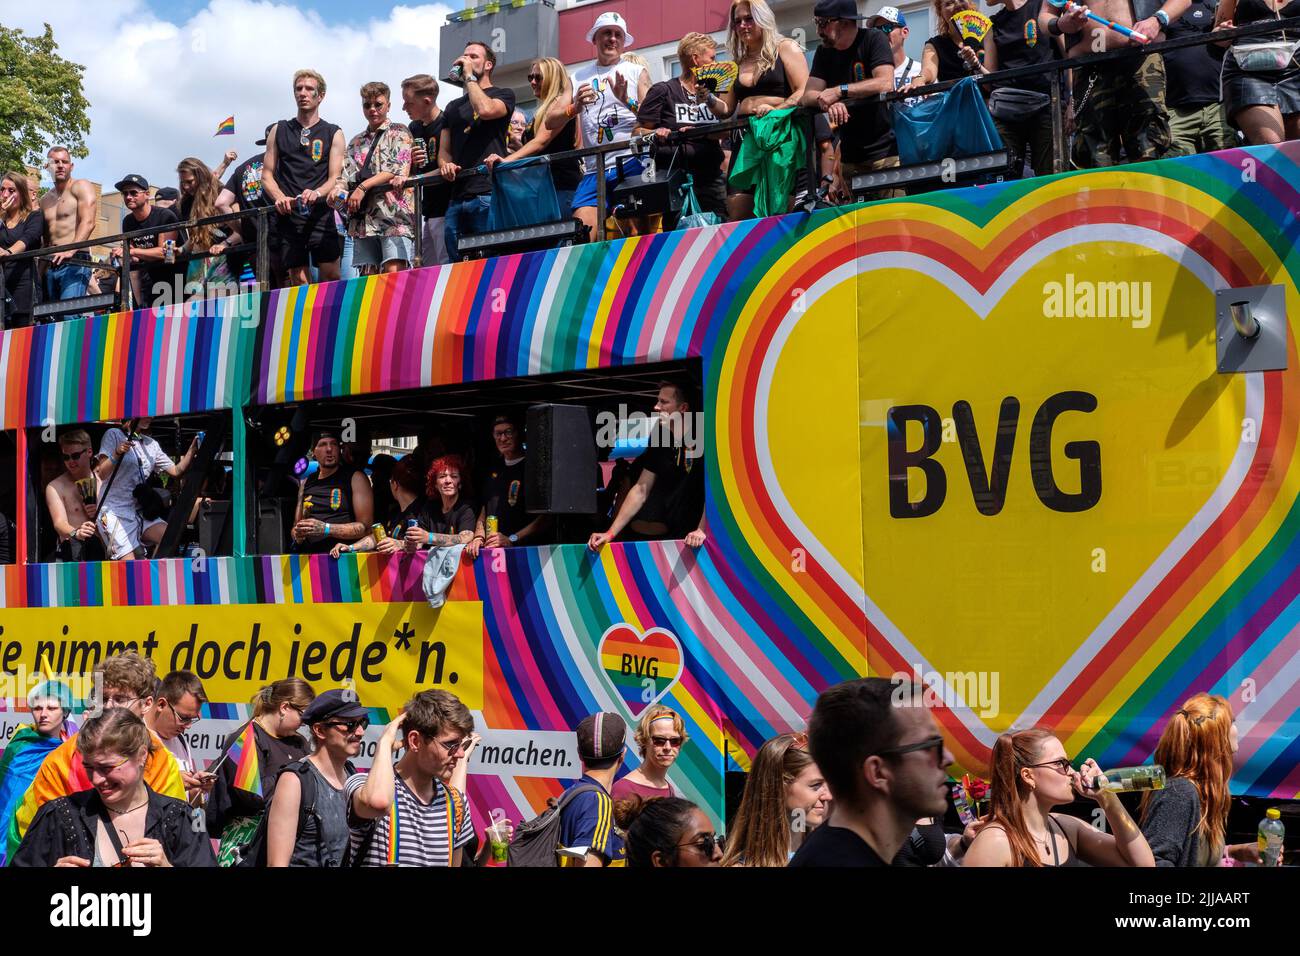 BERLIN, GERMANY - JULY 23, 2022: The Berlin public transport operator BVG's float at the Pride parade (CSD) in Berlin, Germany on July 23, 2022. Stock Photo